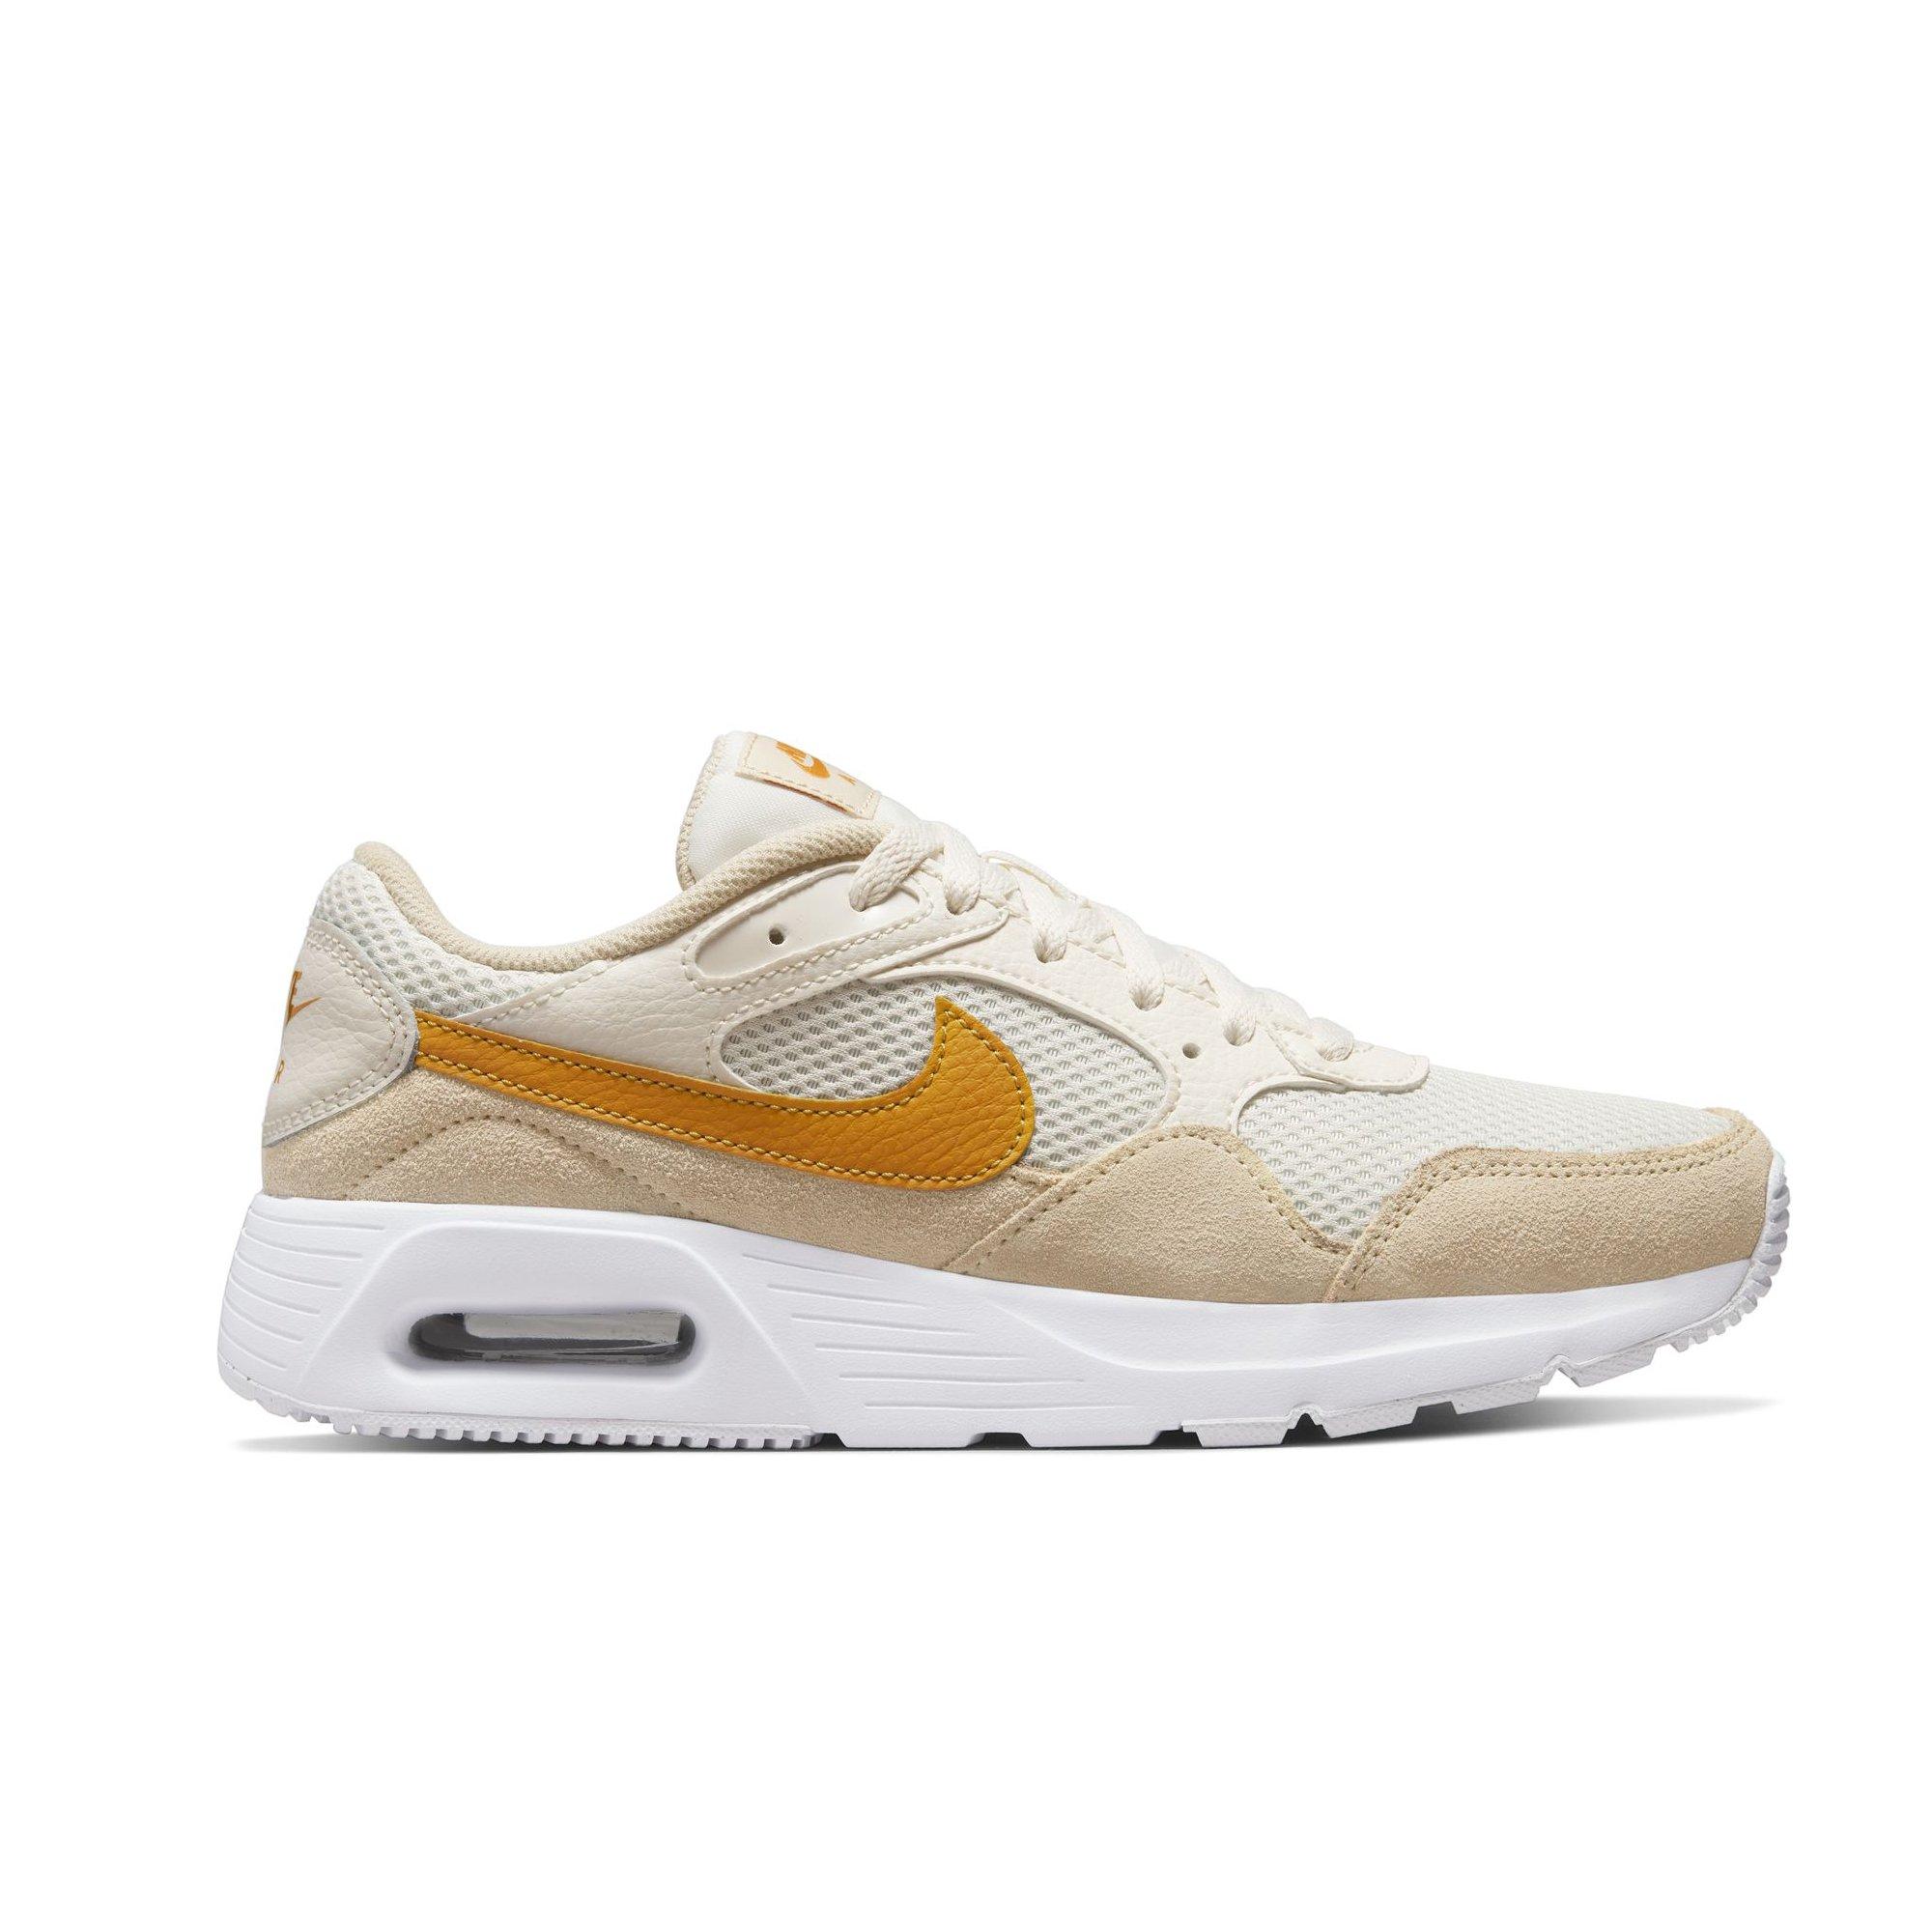 NIKE Air Max 1 SC Suede, Mesh and Leather Sneakers for Men